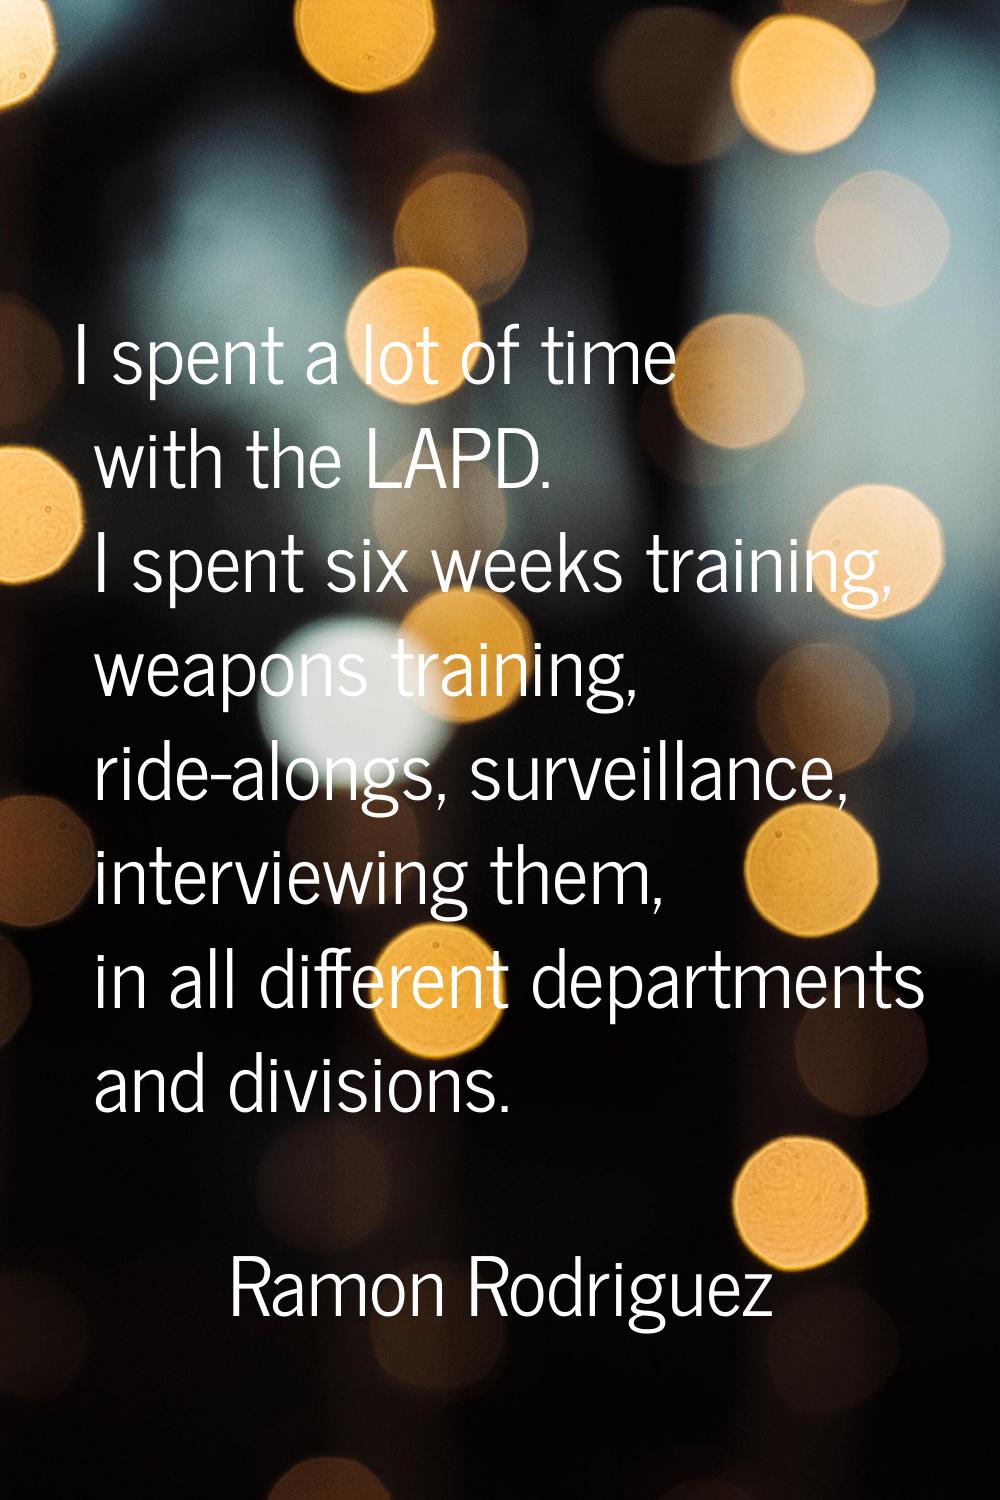 I spent a lot of time with the LAPD. I spent six weeks training, weapons training, ride-alongs, sur